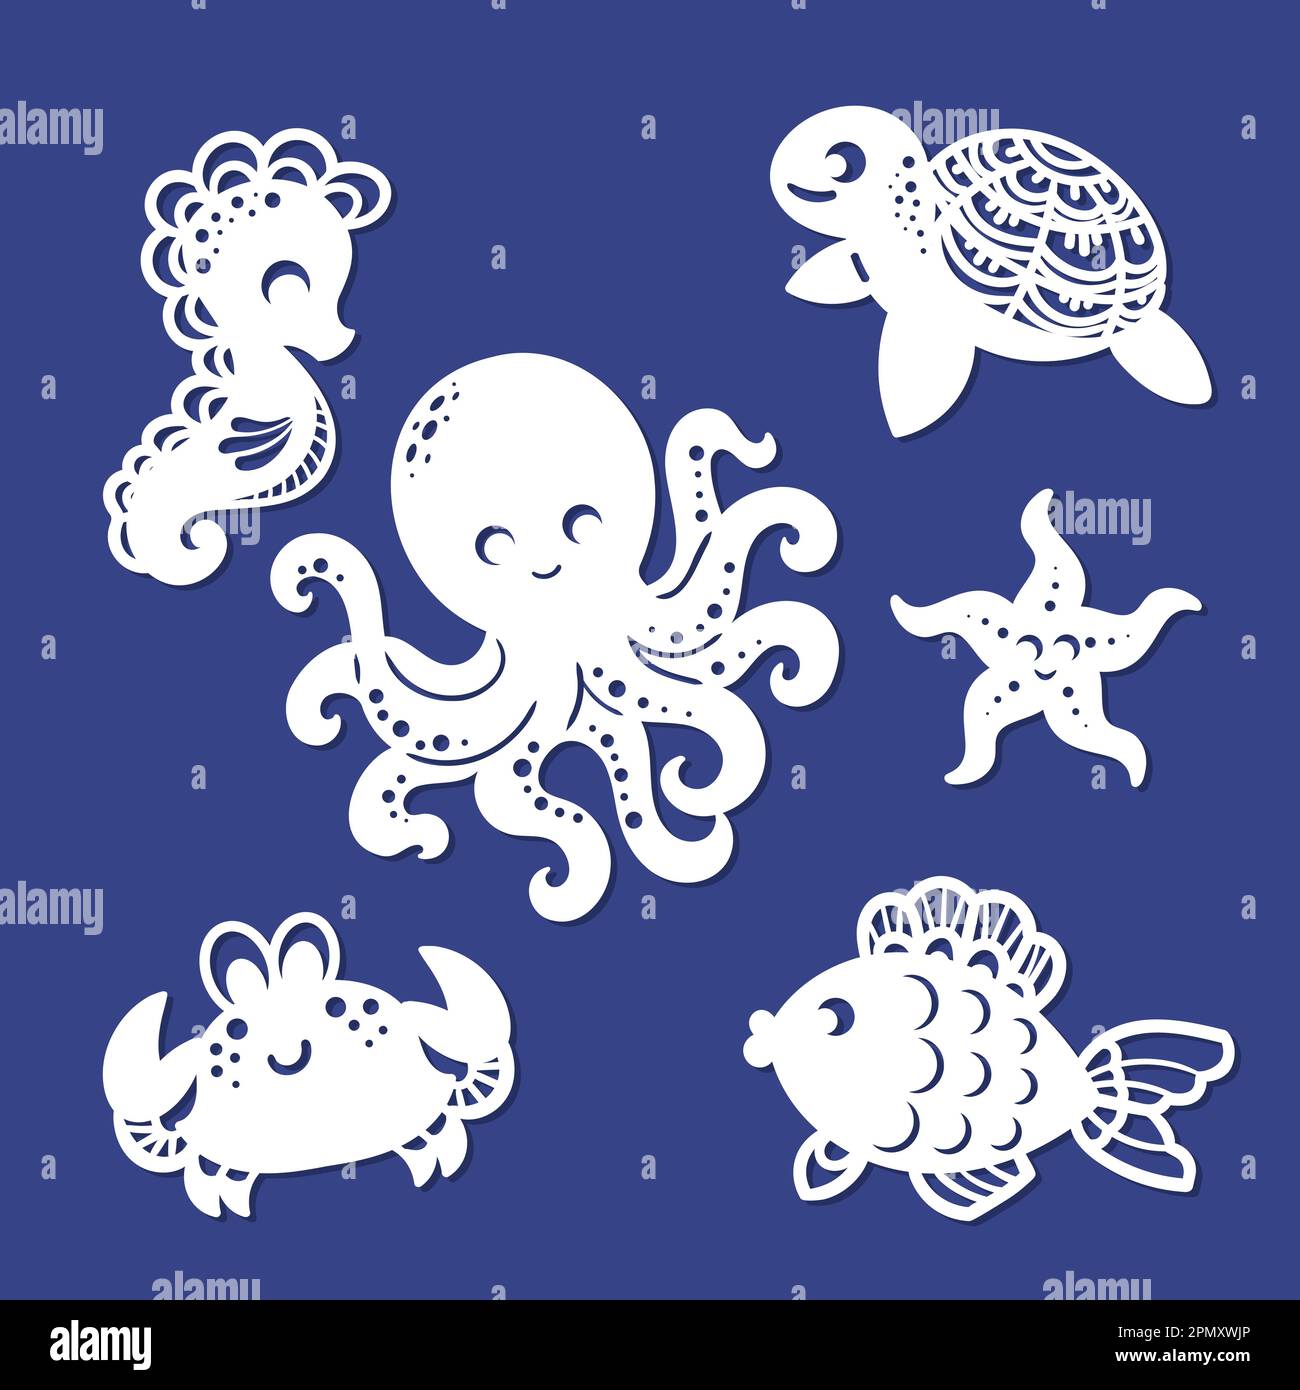 Sea inhabitants, octopus, fish, krvb, seahorse, starfish. A set of templates for laser cutting of paper, cardboard, wood, metal. For the design of car Stock Vector